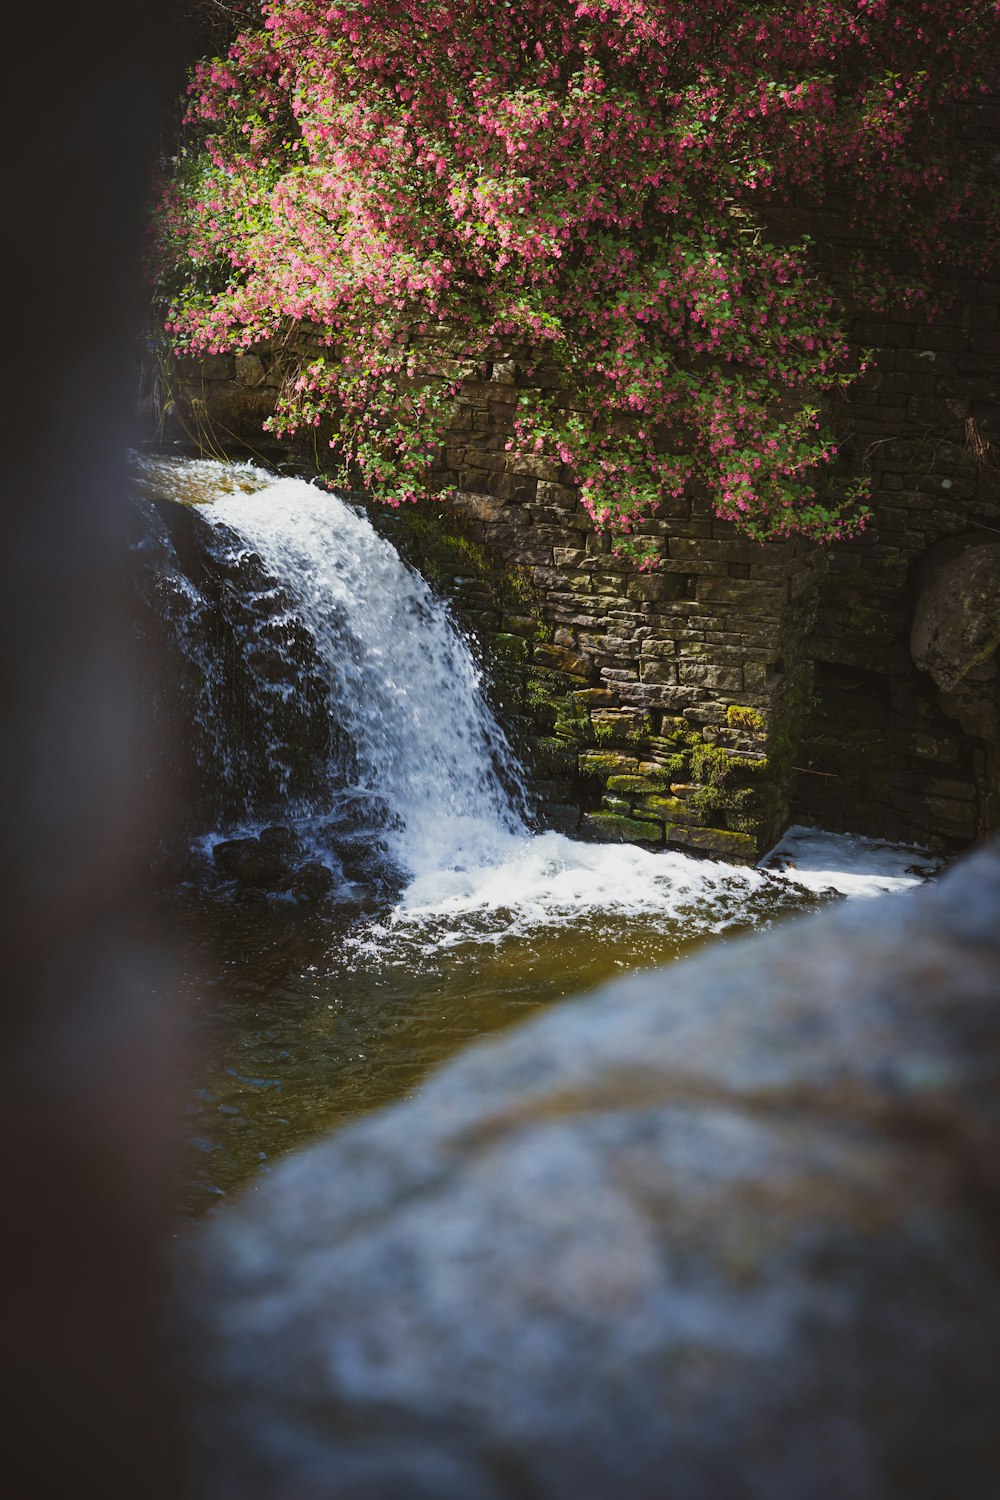 a small waterfall with pink flowers in the background